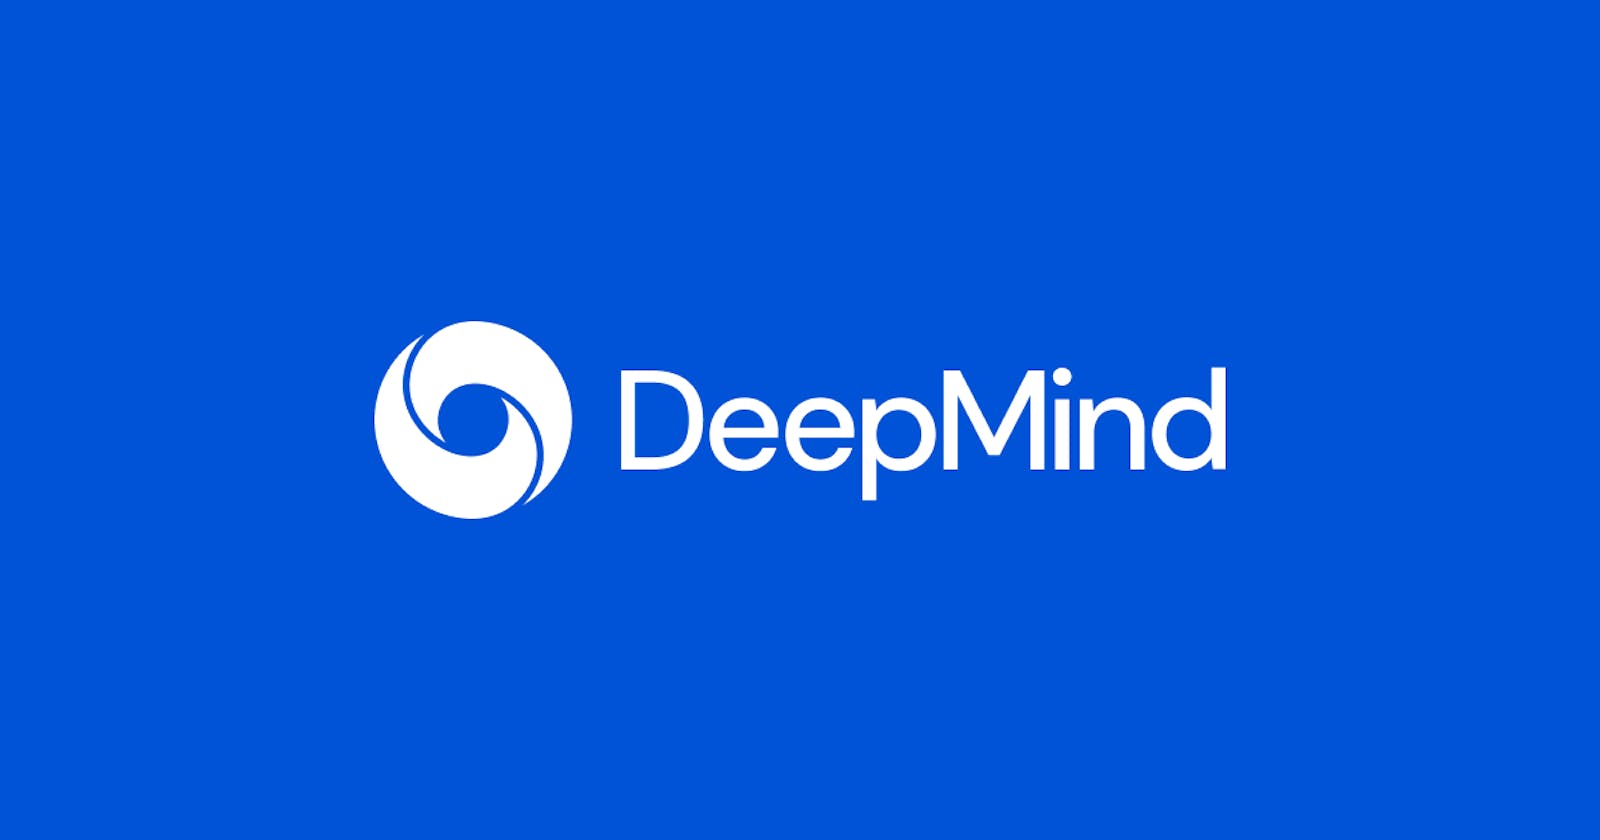 DeepMind: Exploring an innovative AI startup owned by Google.